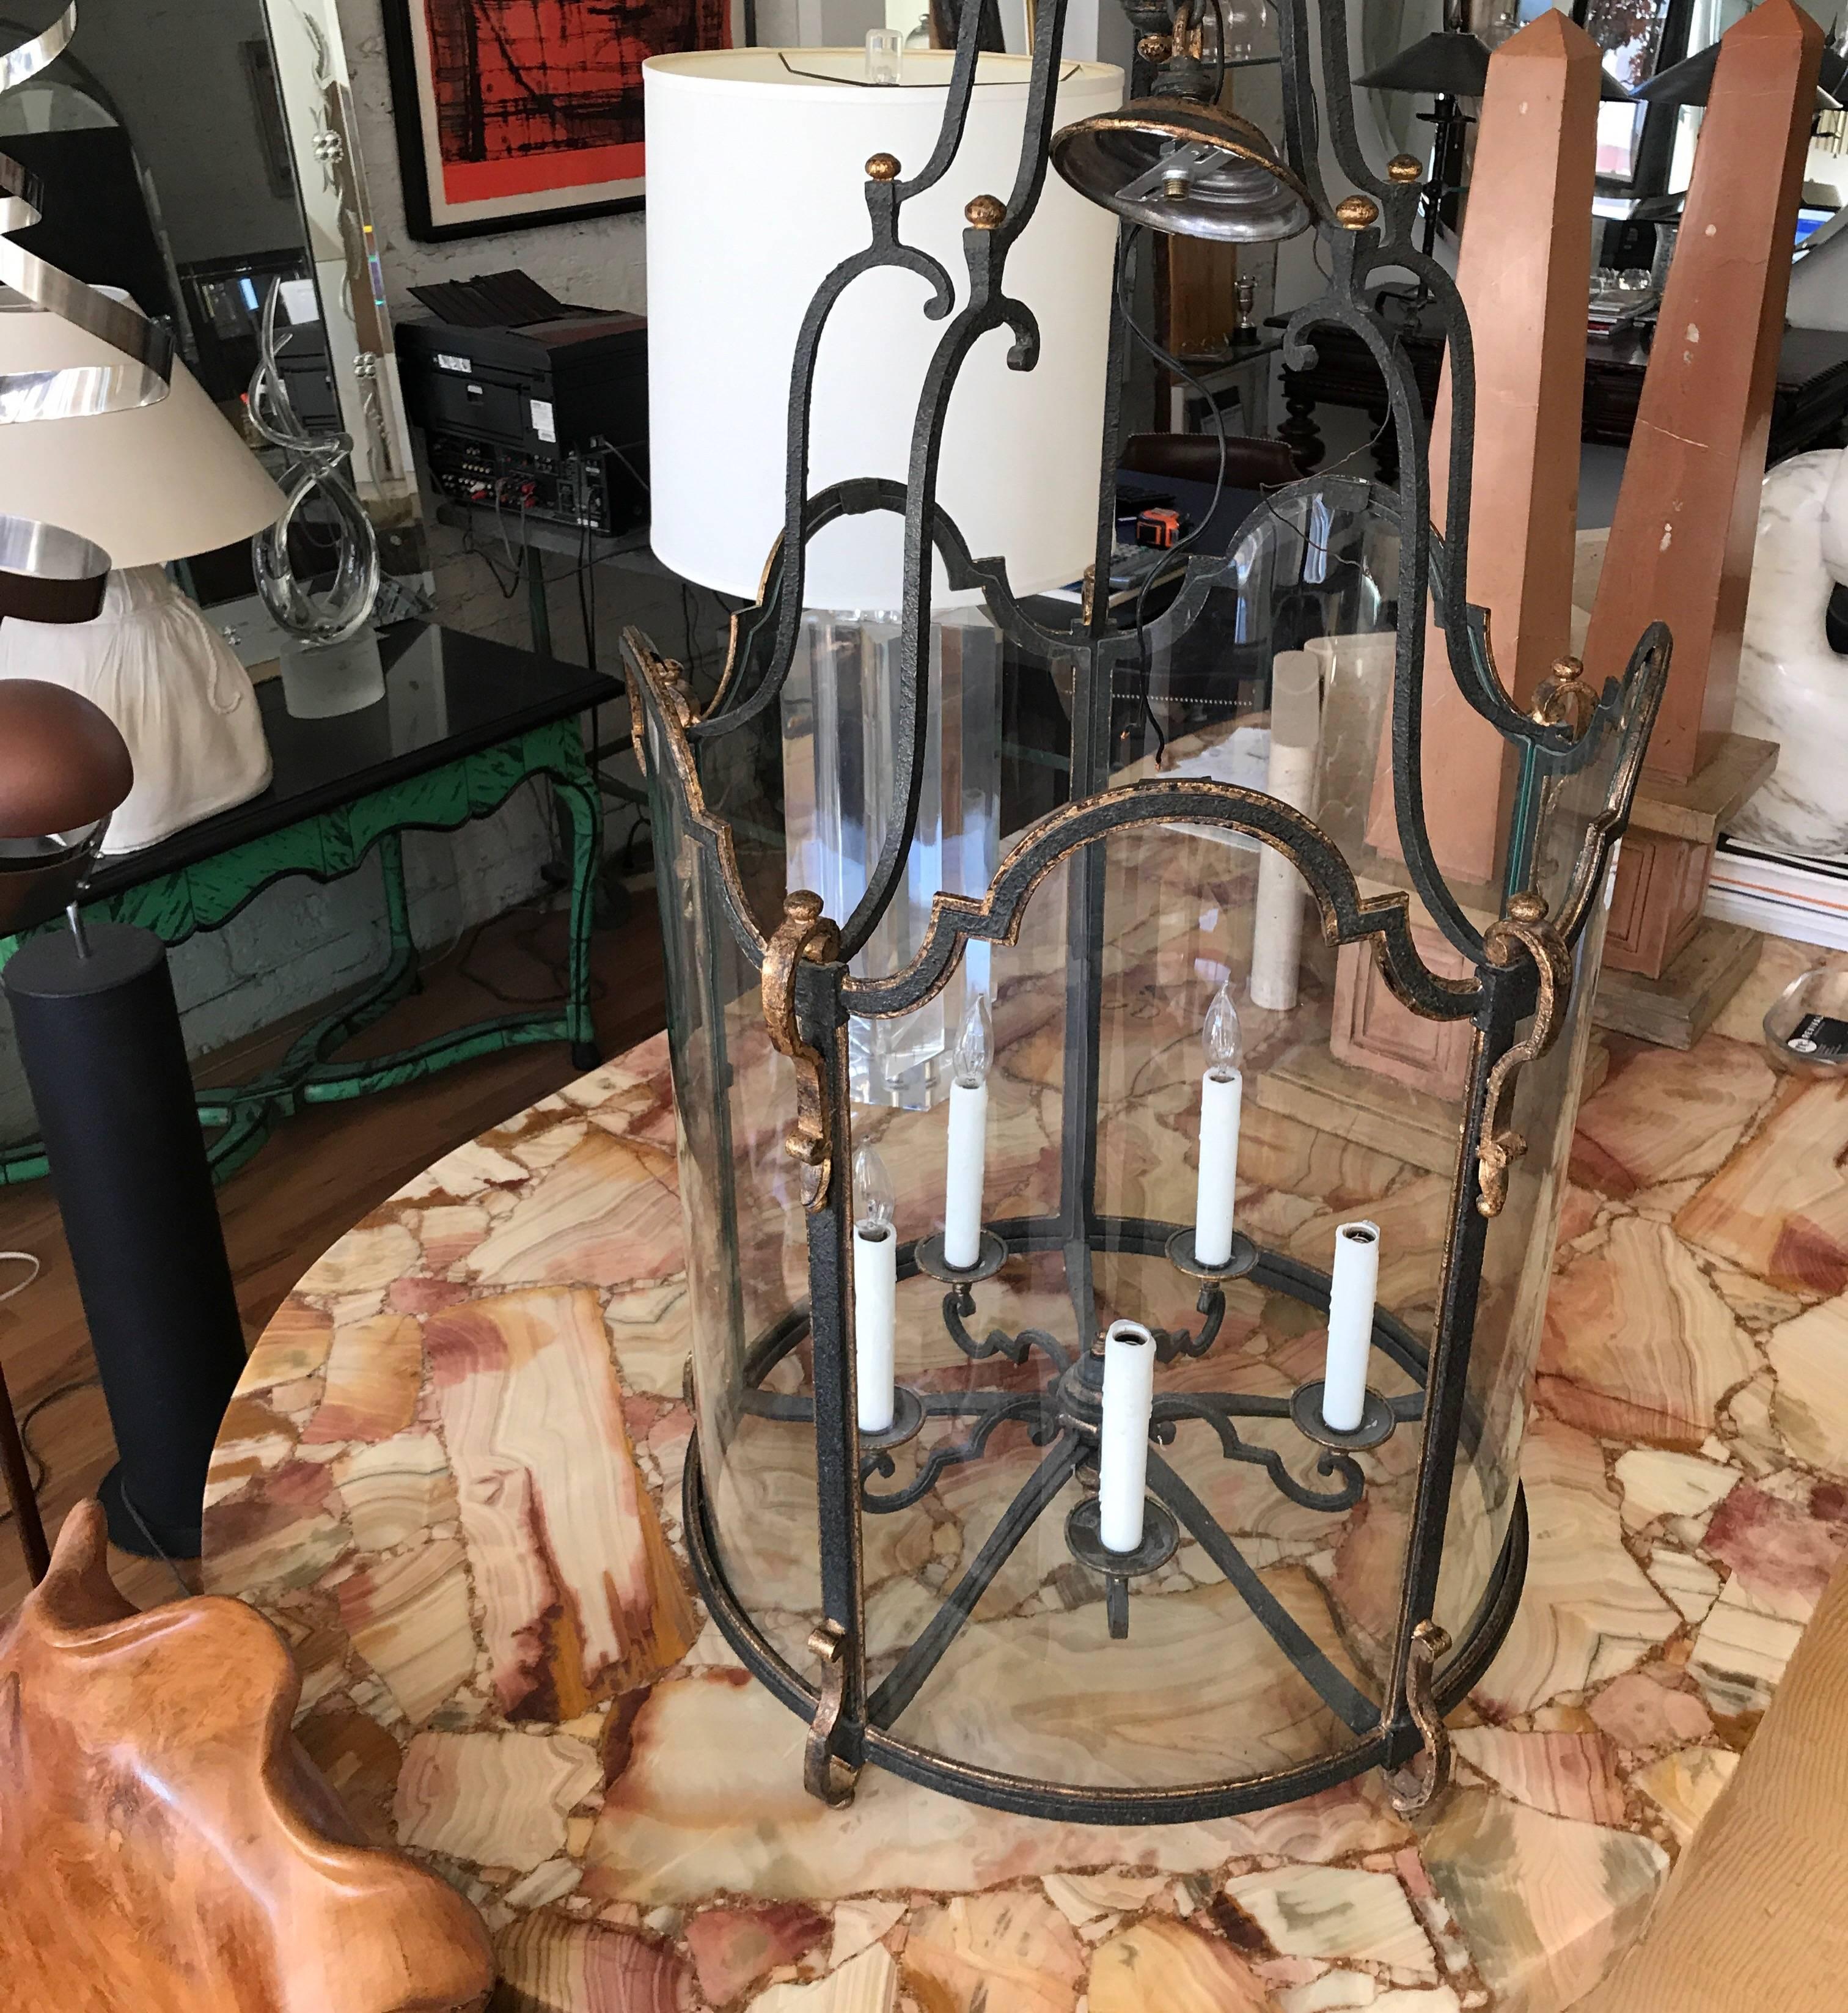 Large scale hand wrought iron and glass hanging center hall lantern. The iron is accented with gilt. 
This Louis XVI style chandelier has imposing proportions. The curved glass is handblown.